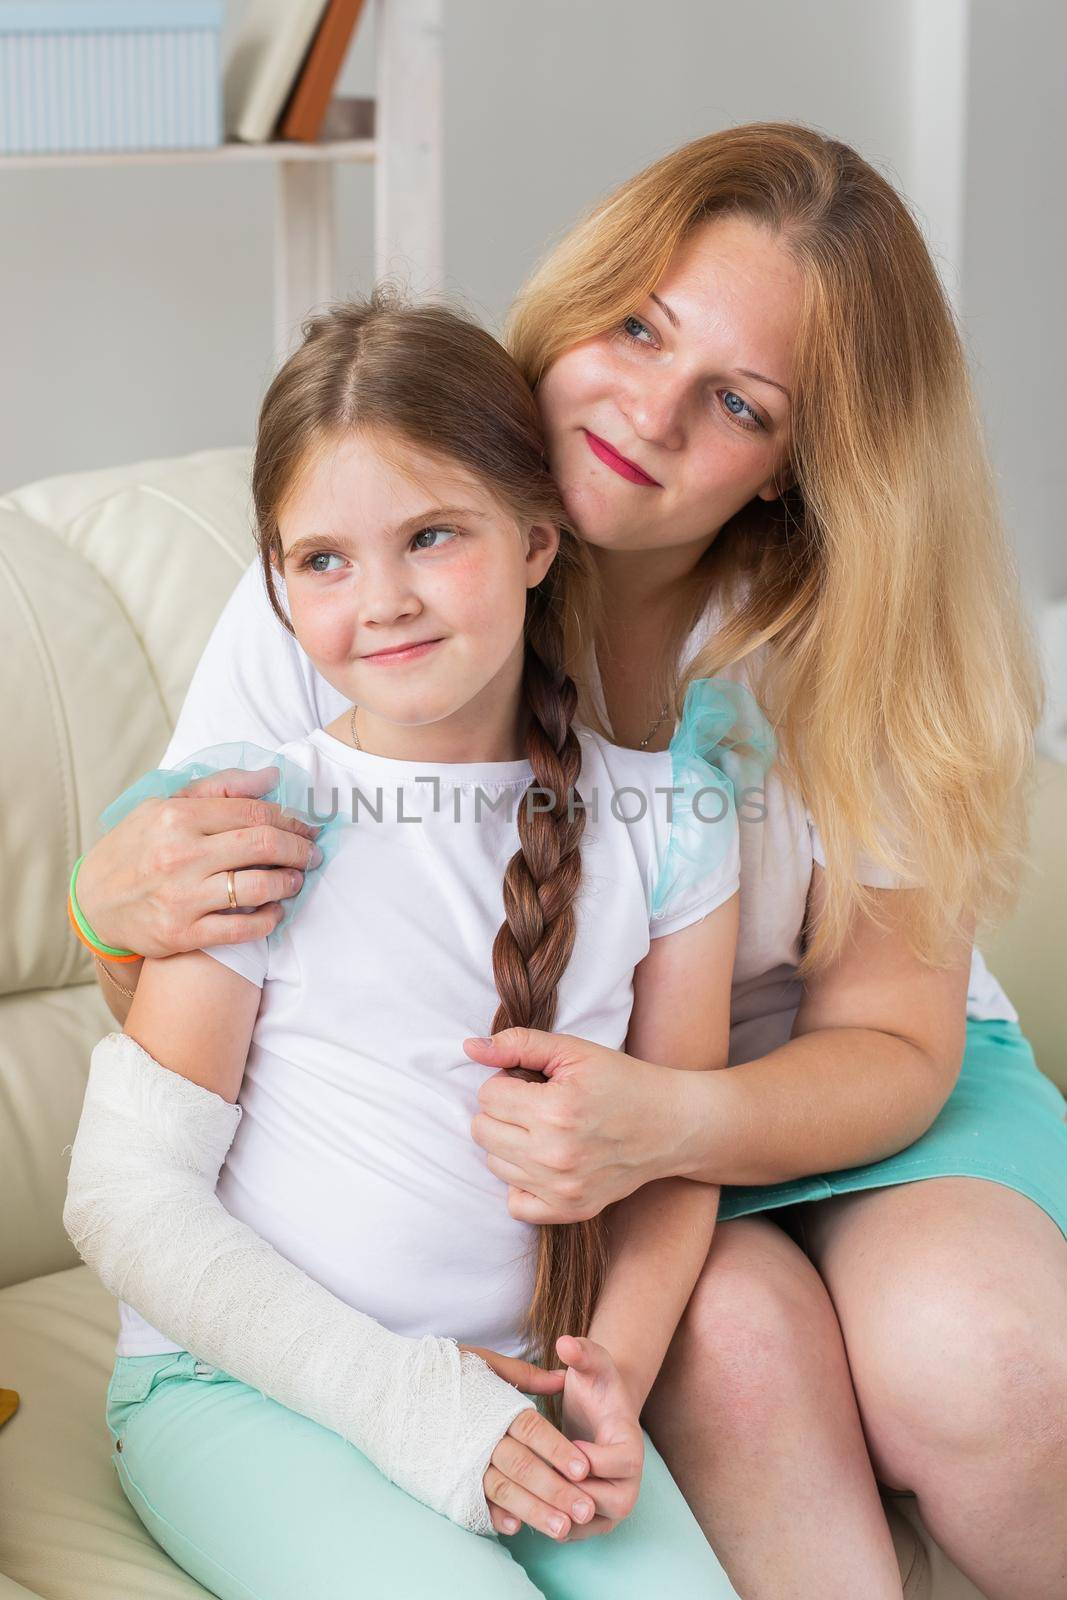 Mother hugs your child girl with a cast on a broken wrist or arm smiling. Childhood illnesses, a positive outlook and recovery